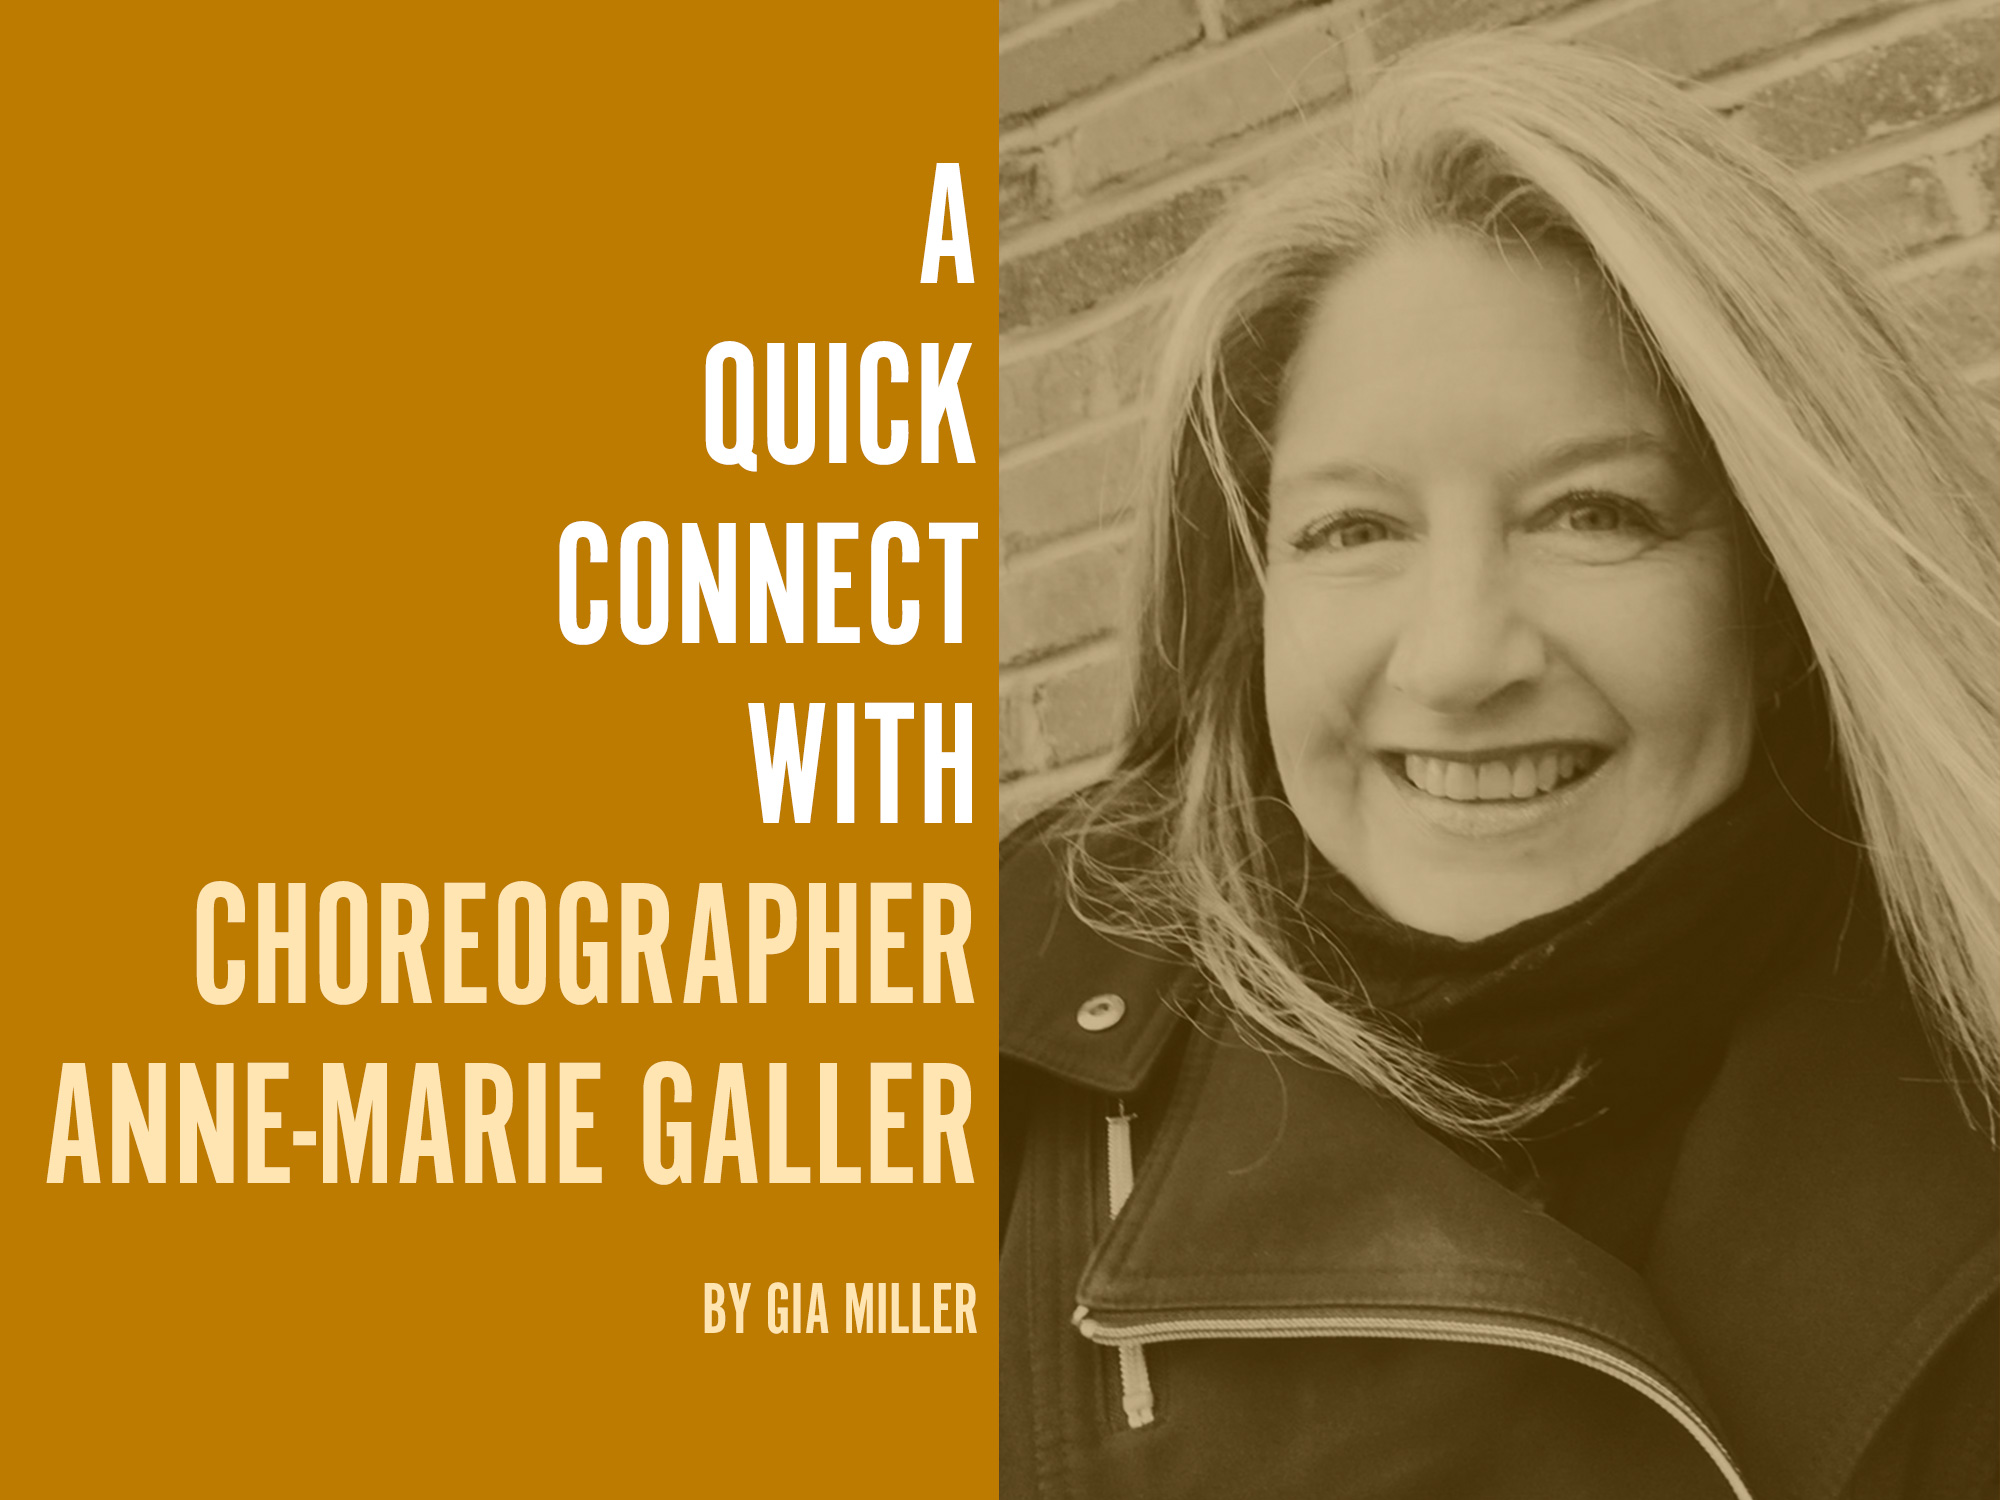 A Quick Connect with ... Choreographer Anne-Marie Galler